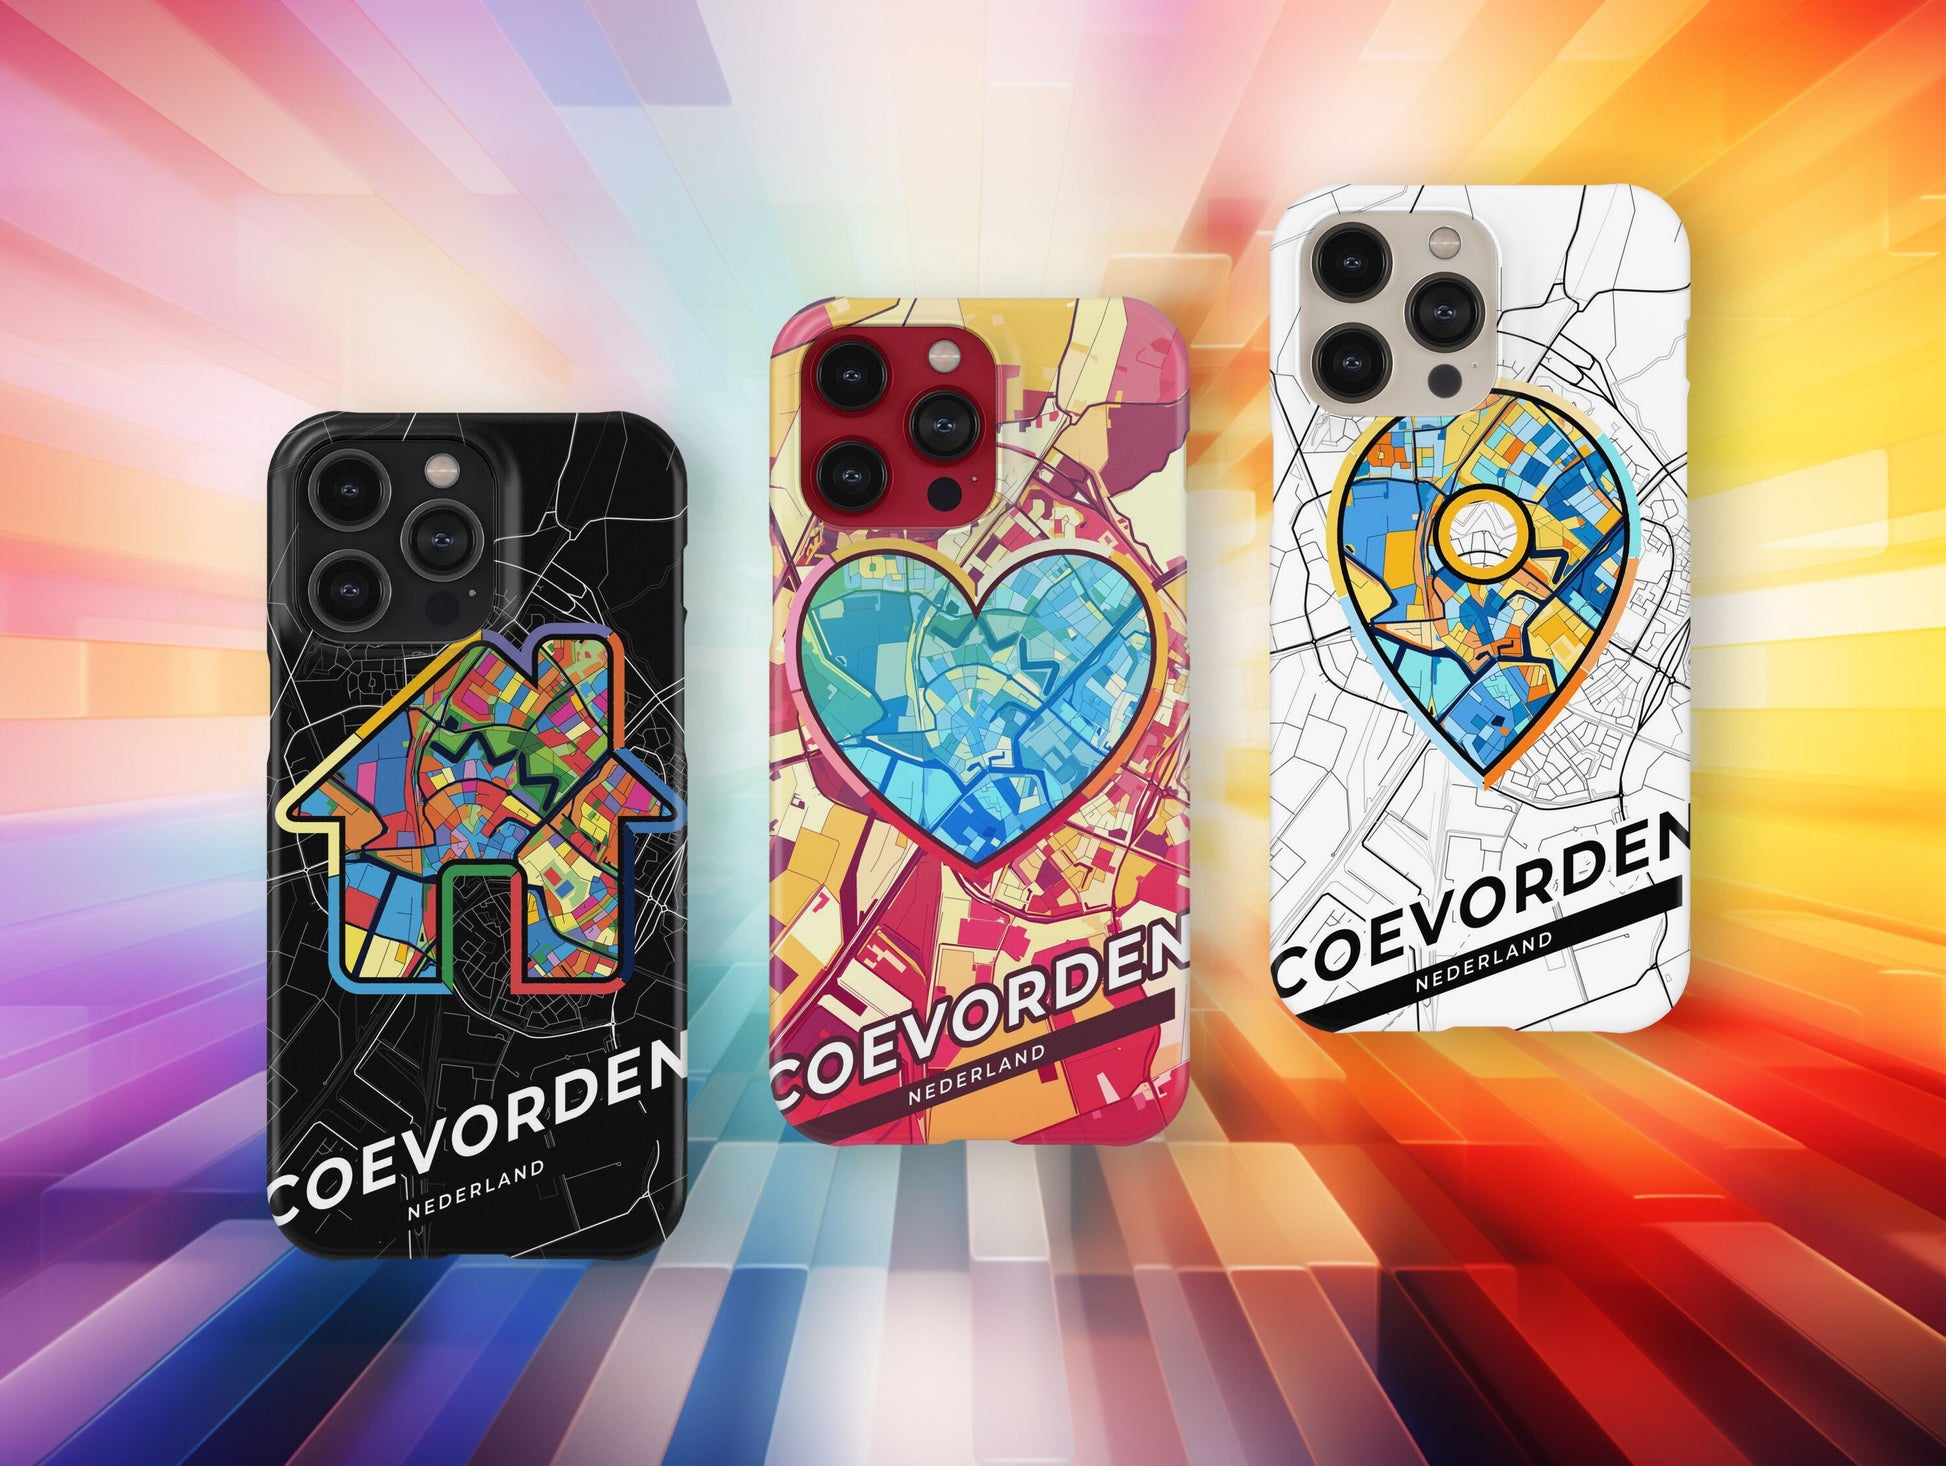 Coevorden Netherlands slim phone case with colorful icon. Birthday, wedding or housewarming gift. Couple match cases.